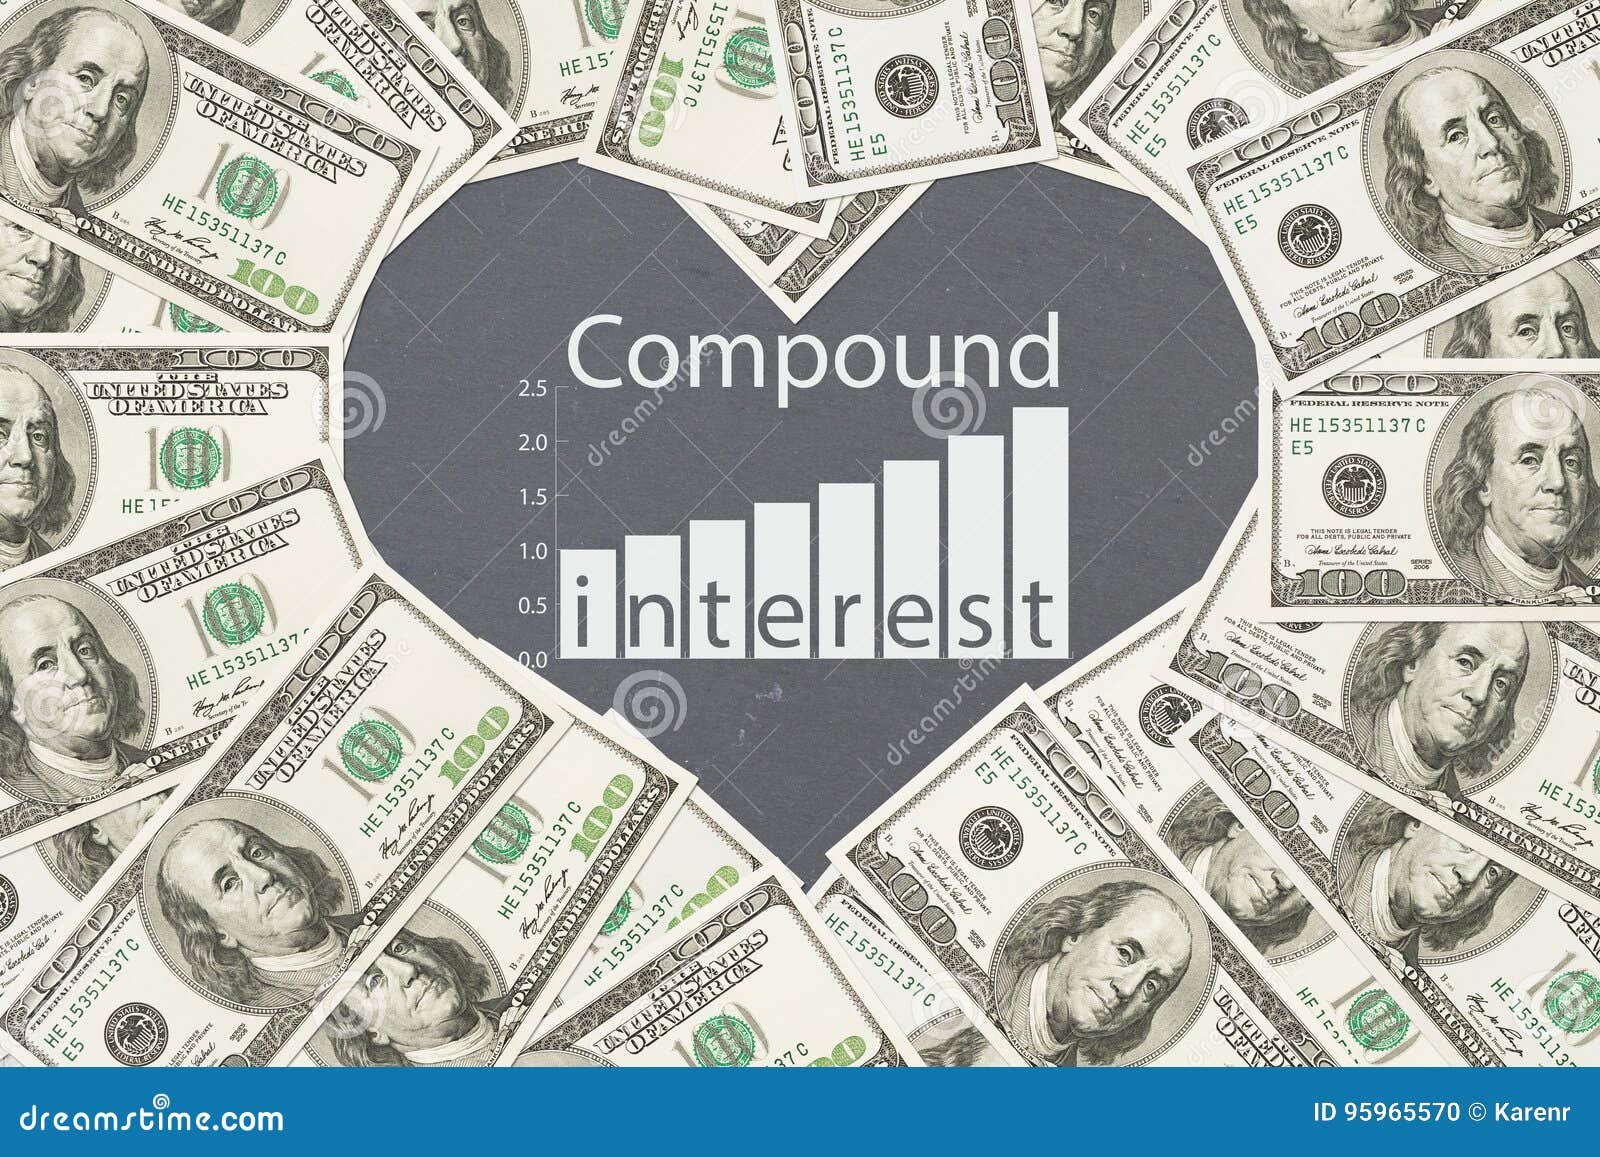 the benefits of compound interest